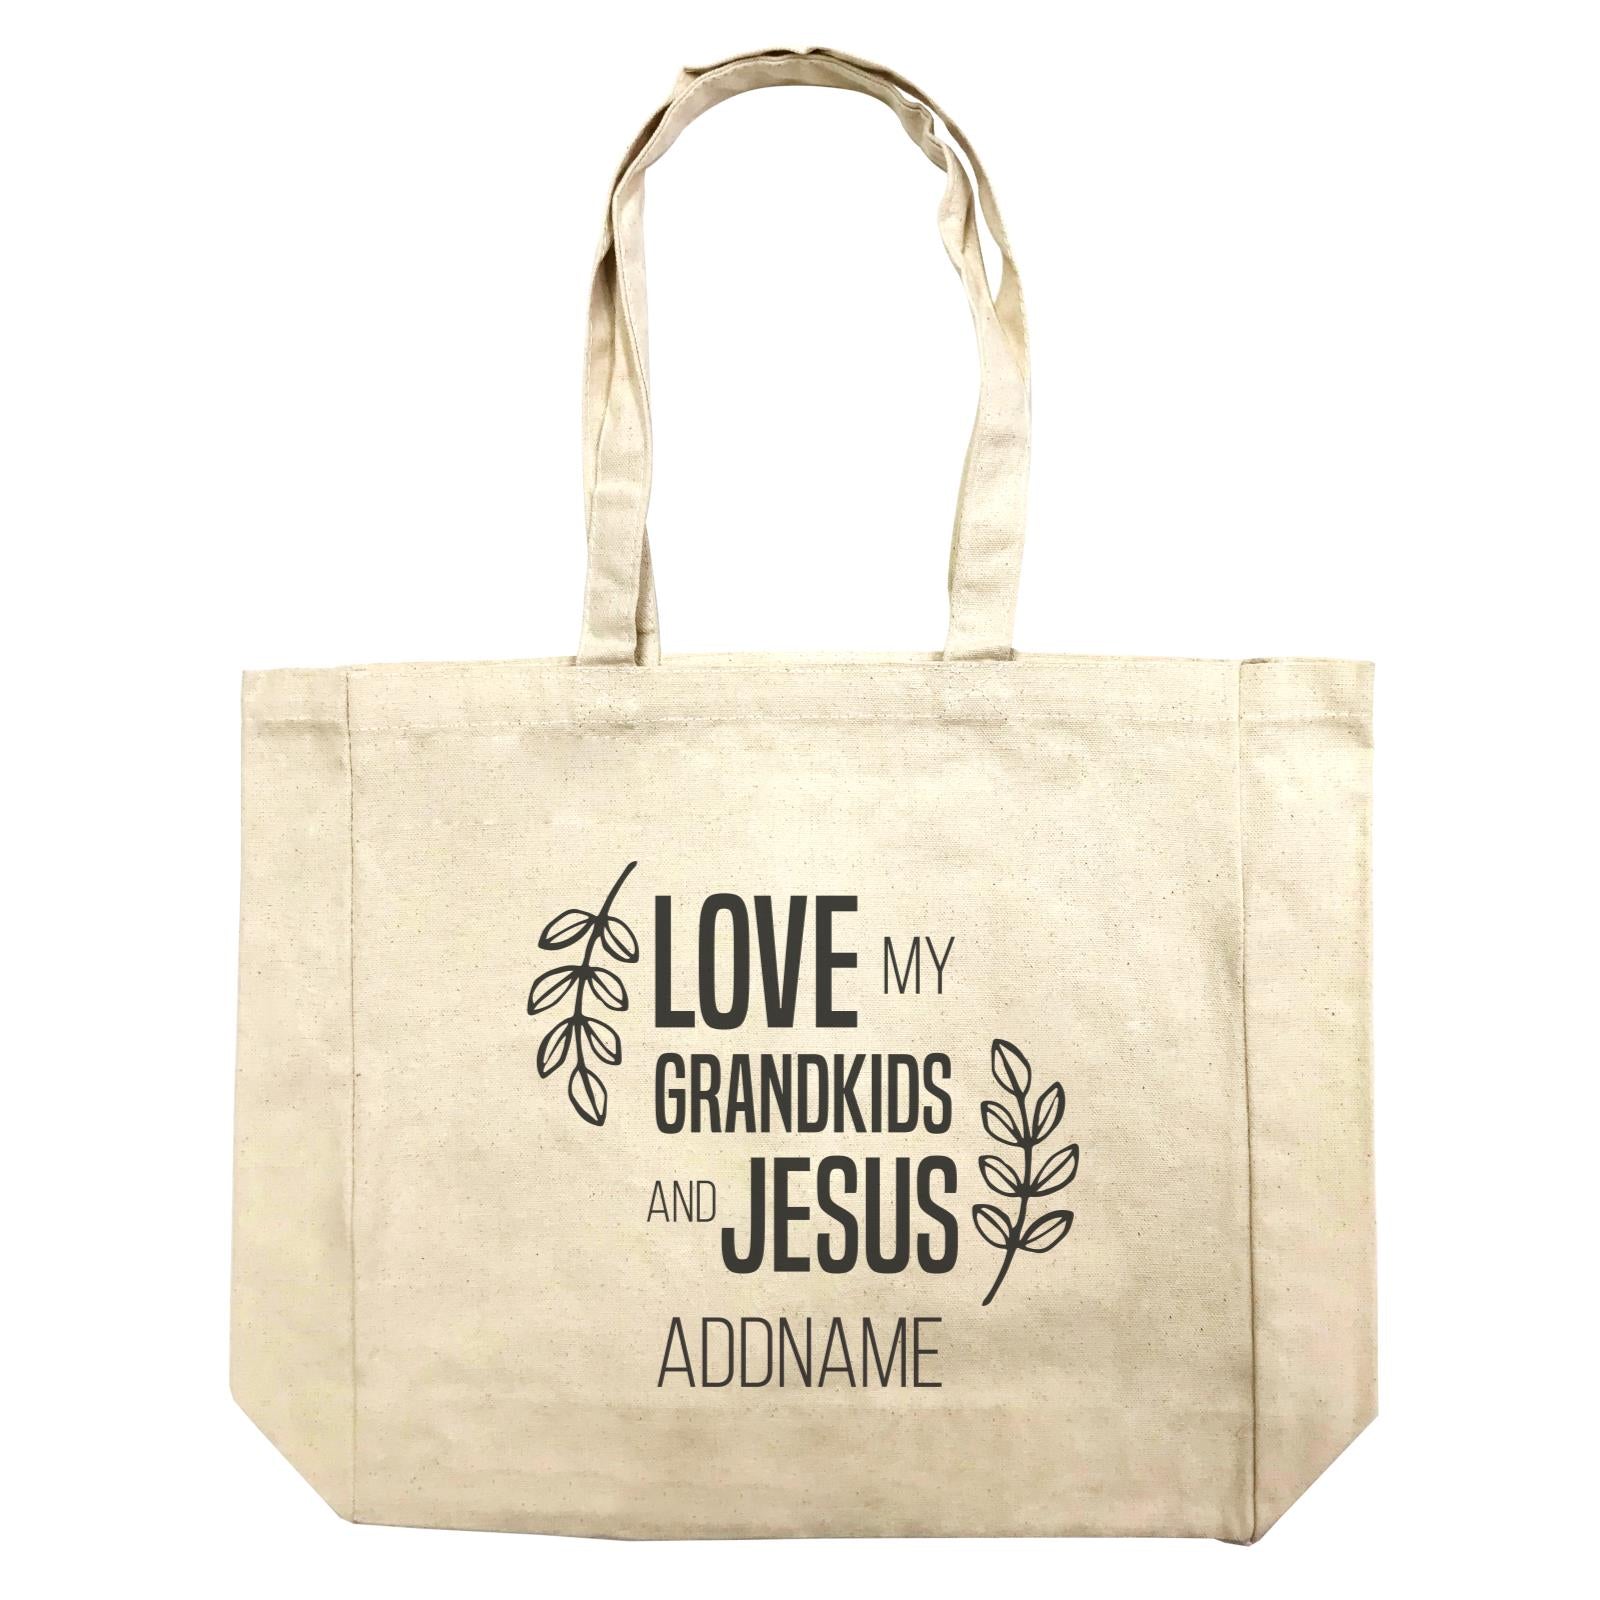 Christian Series Love My Grandkids And Jesus Addname Shopping Bag